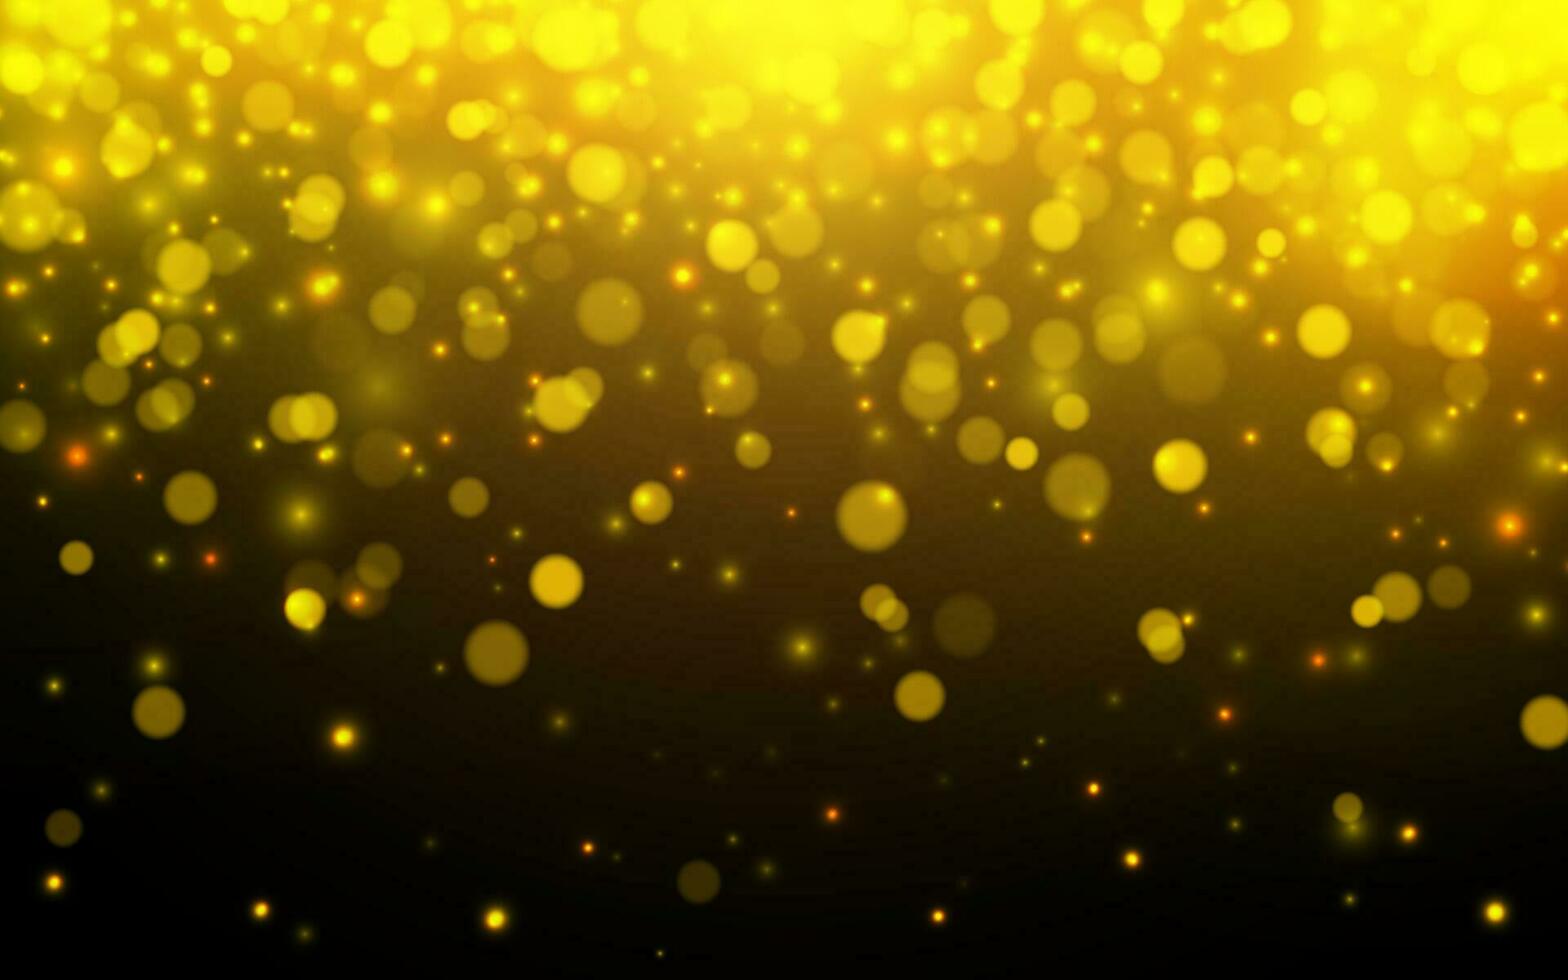 Golden luxury bokeh soft light abstract backgrounds, Vector eps 10 illustration bokeh particles, Backgrounds decoration